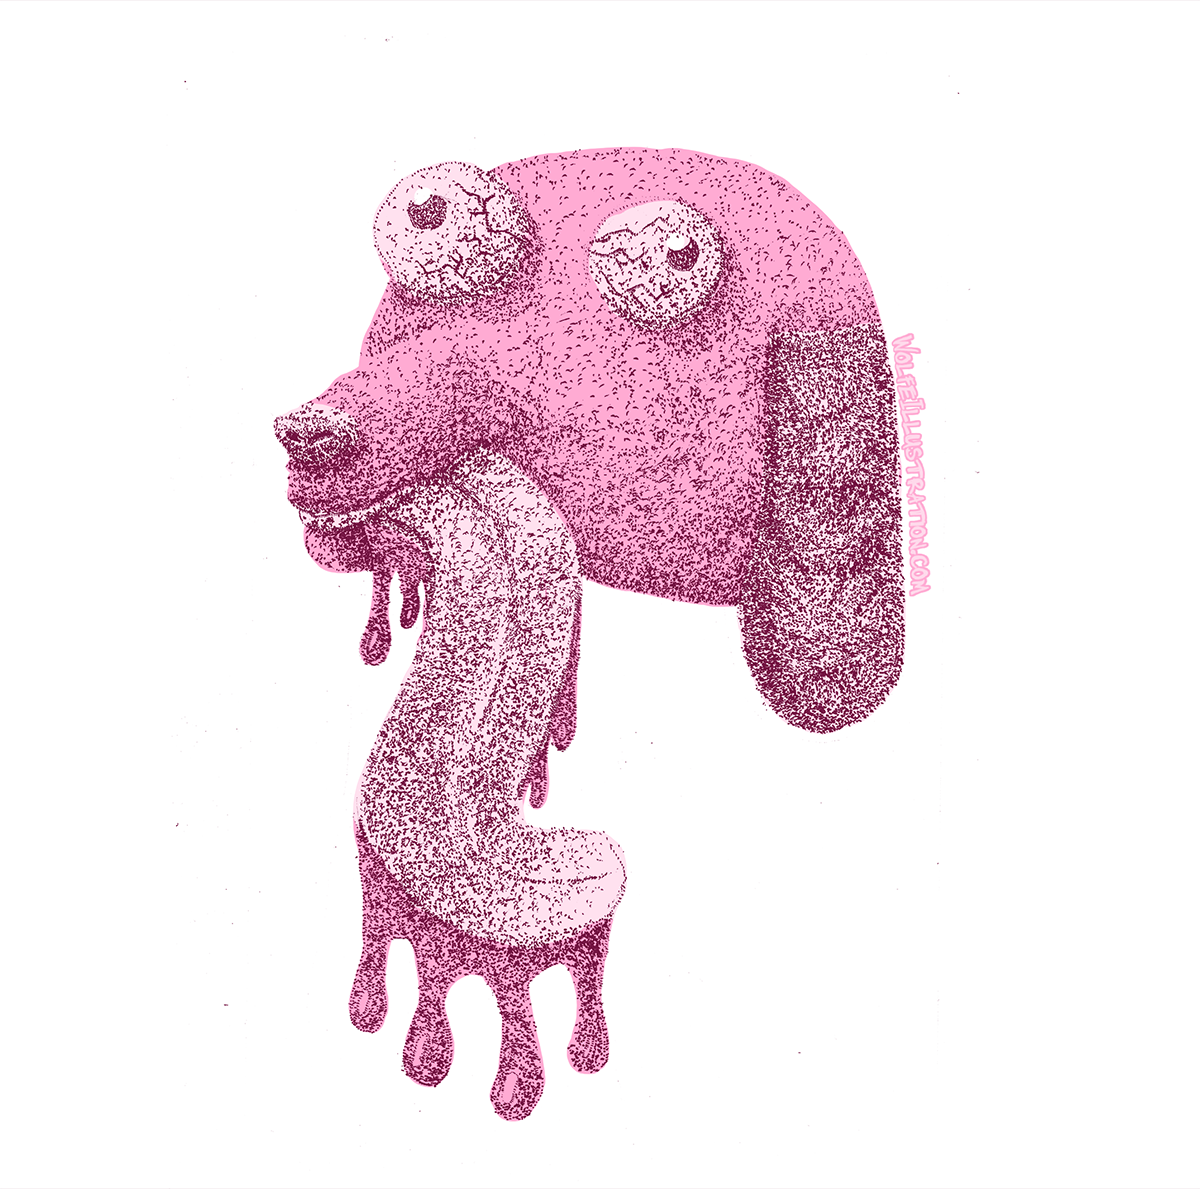 A digital illustration by Brian Wolfe of a pointillist pink dog head with large bulging eyes and a long tongue dripping with pink saliva